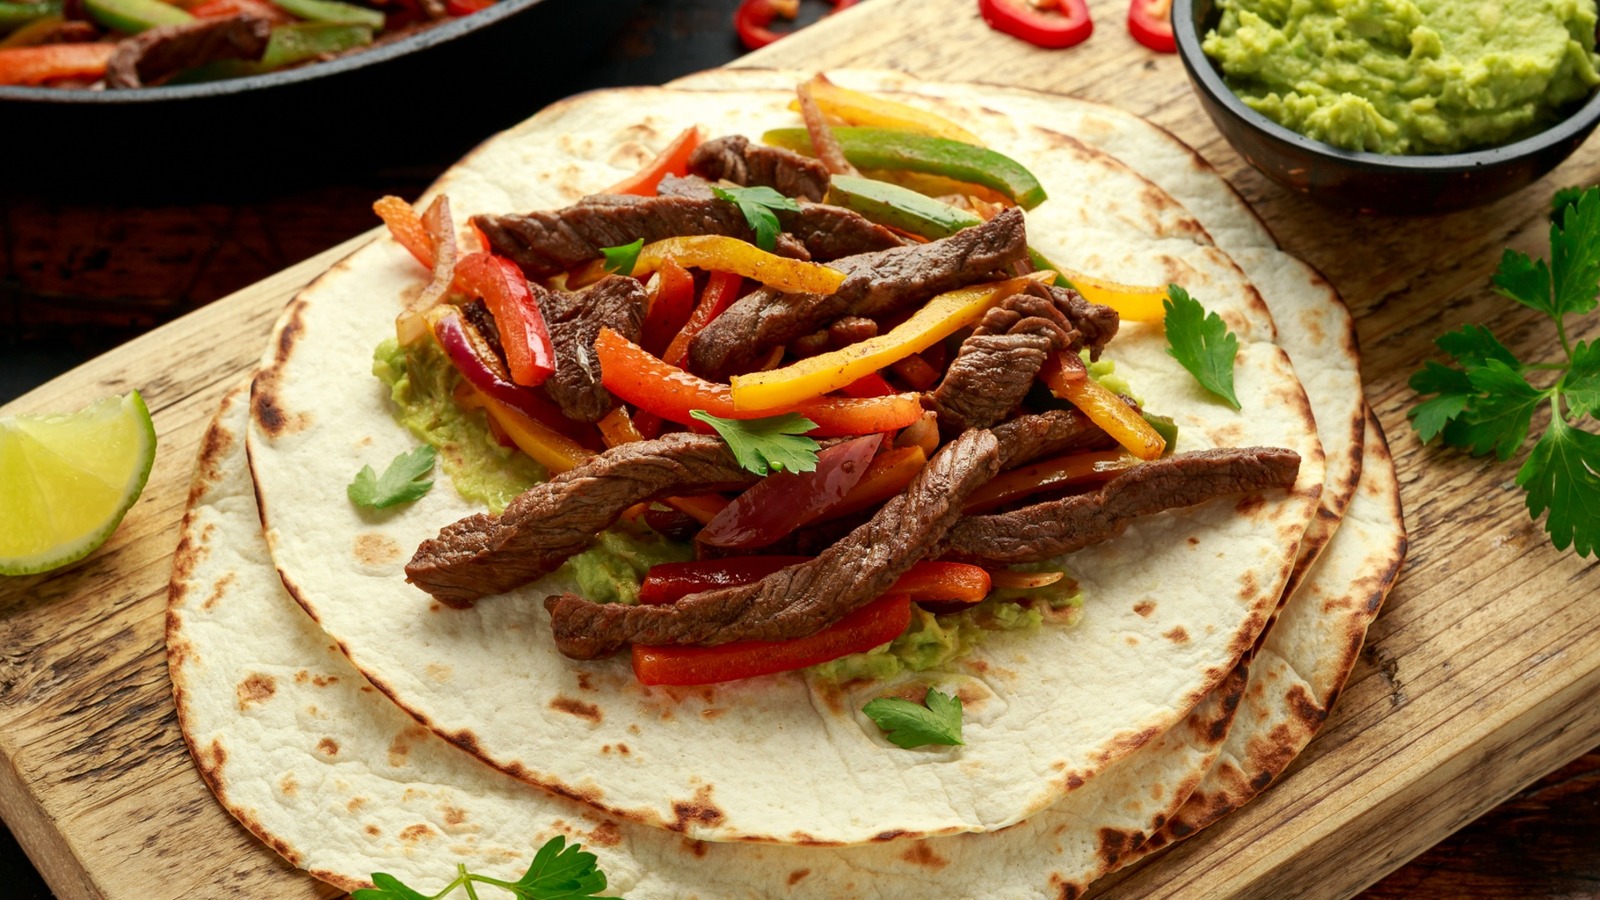 The best type of steak to use in your fajitas